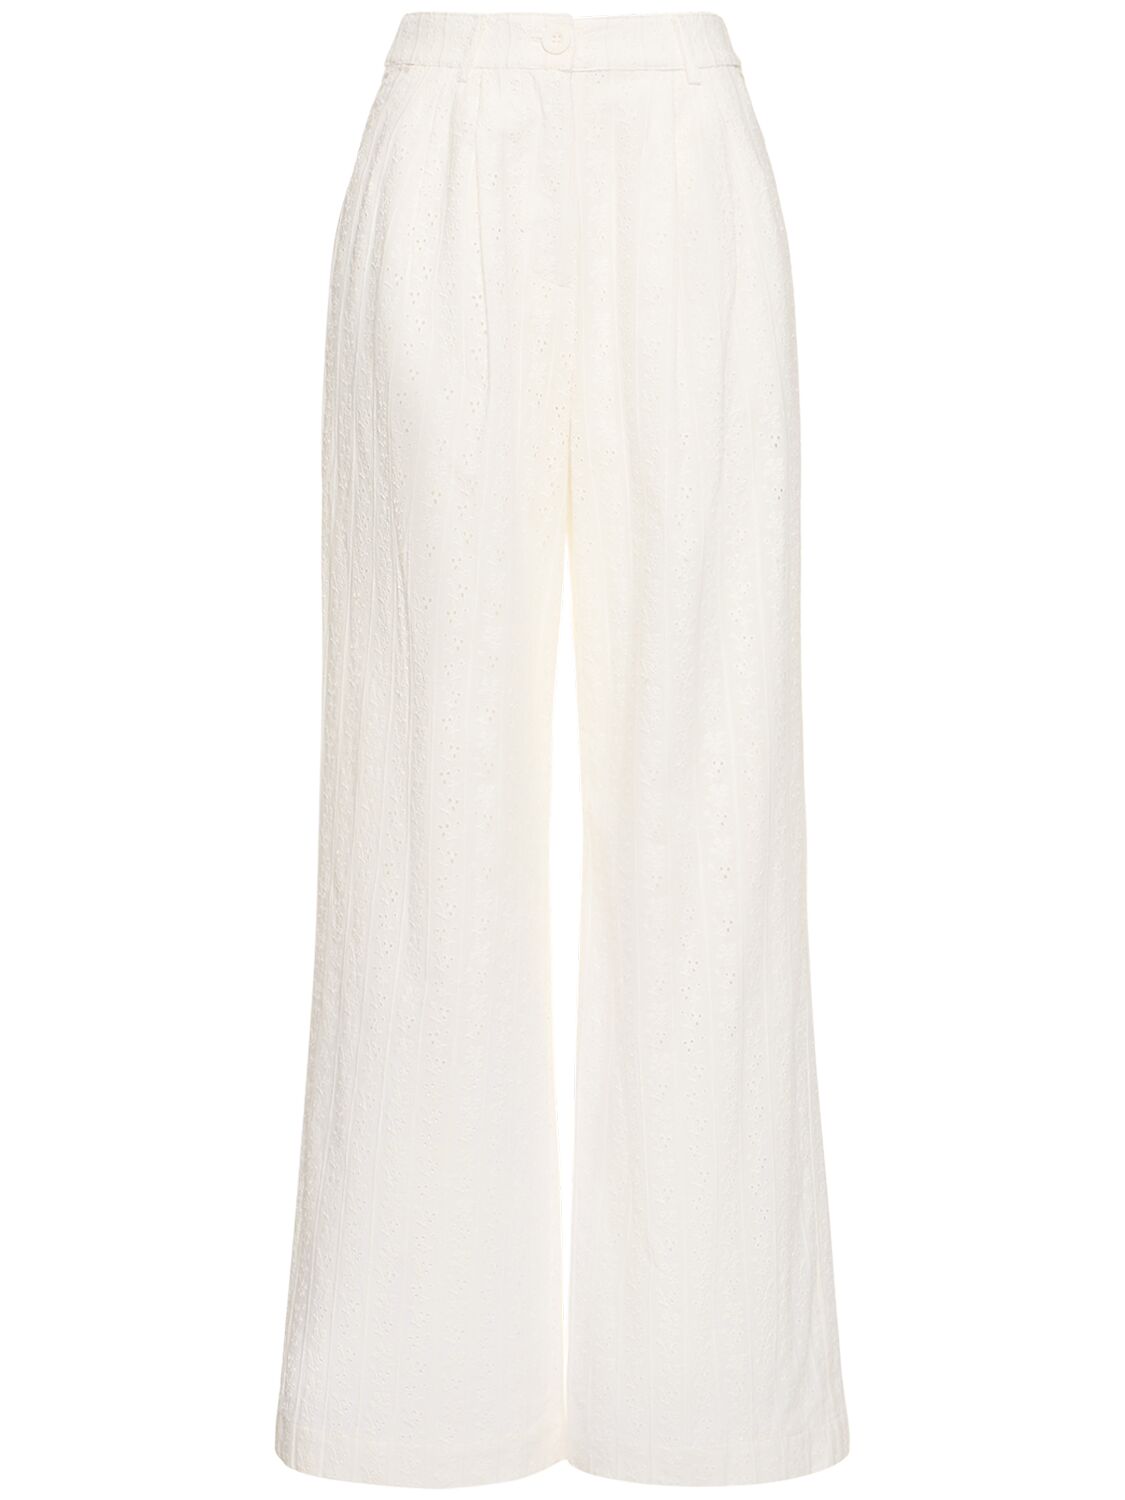 Weworewhat Cotton Eyelet Lace Wide Pants In White